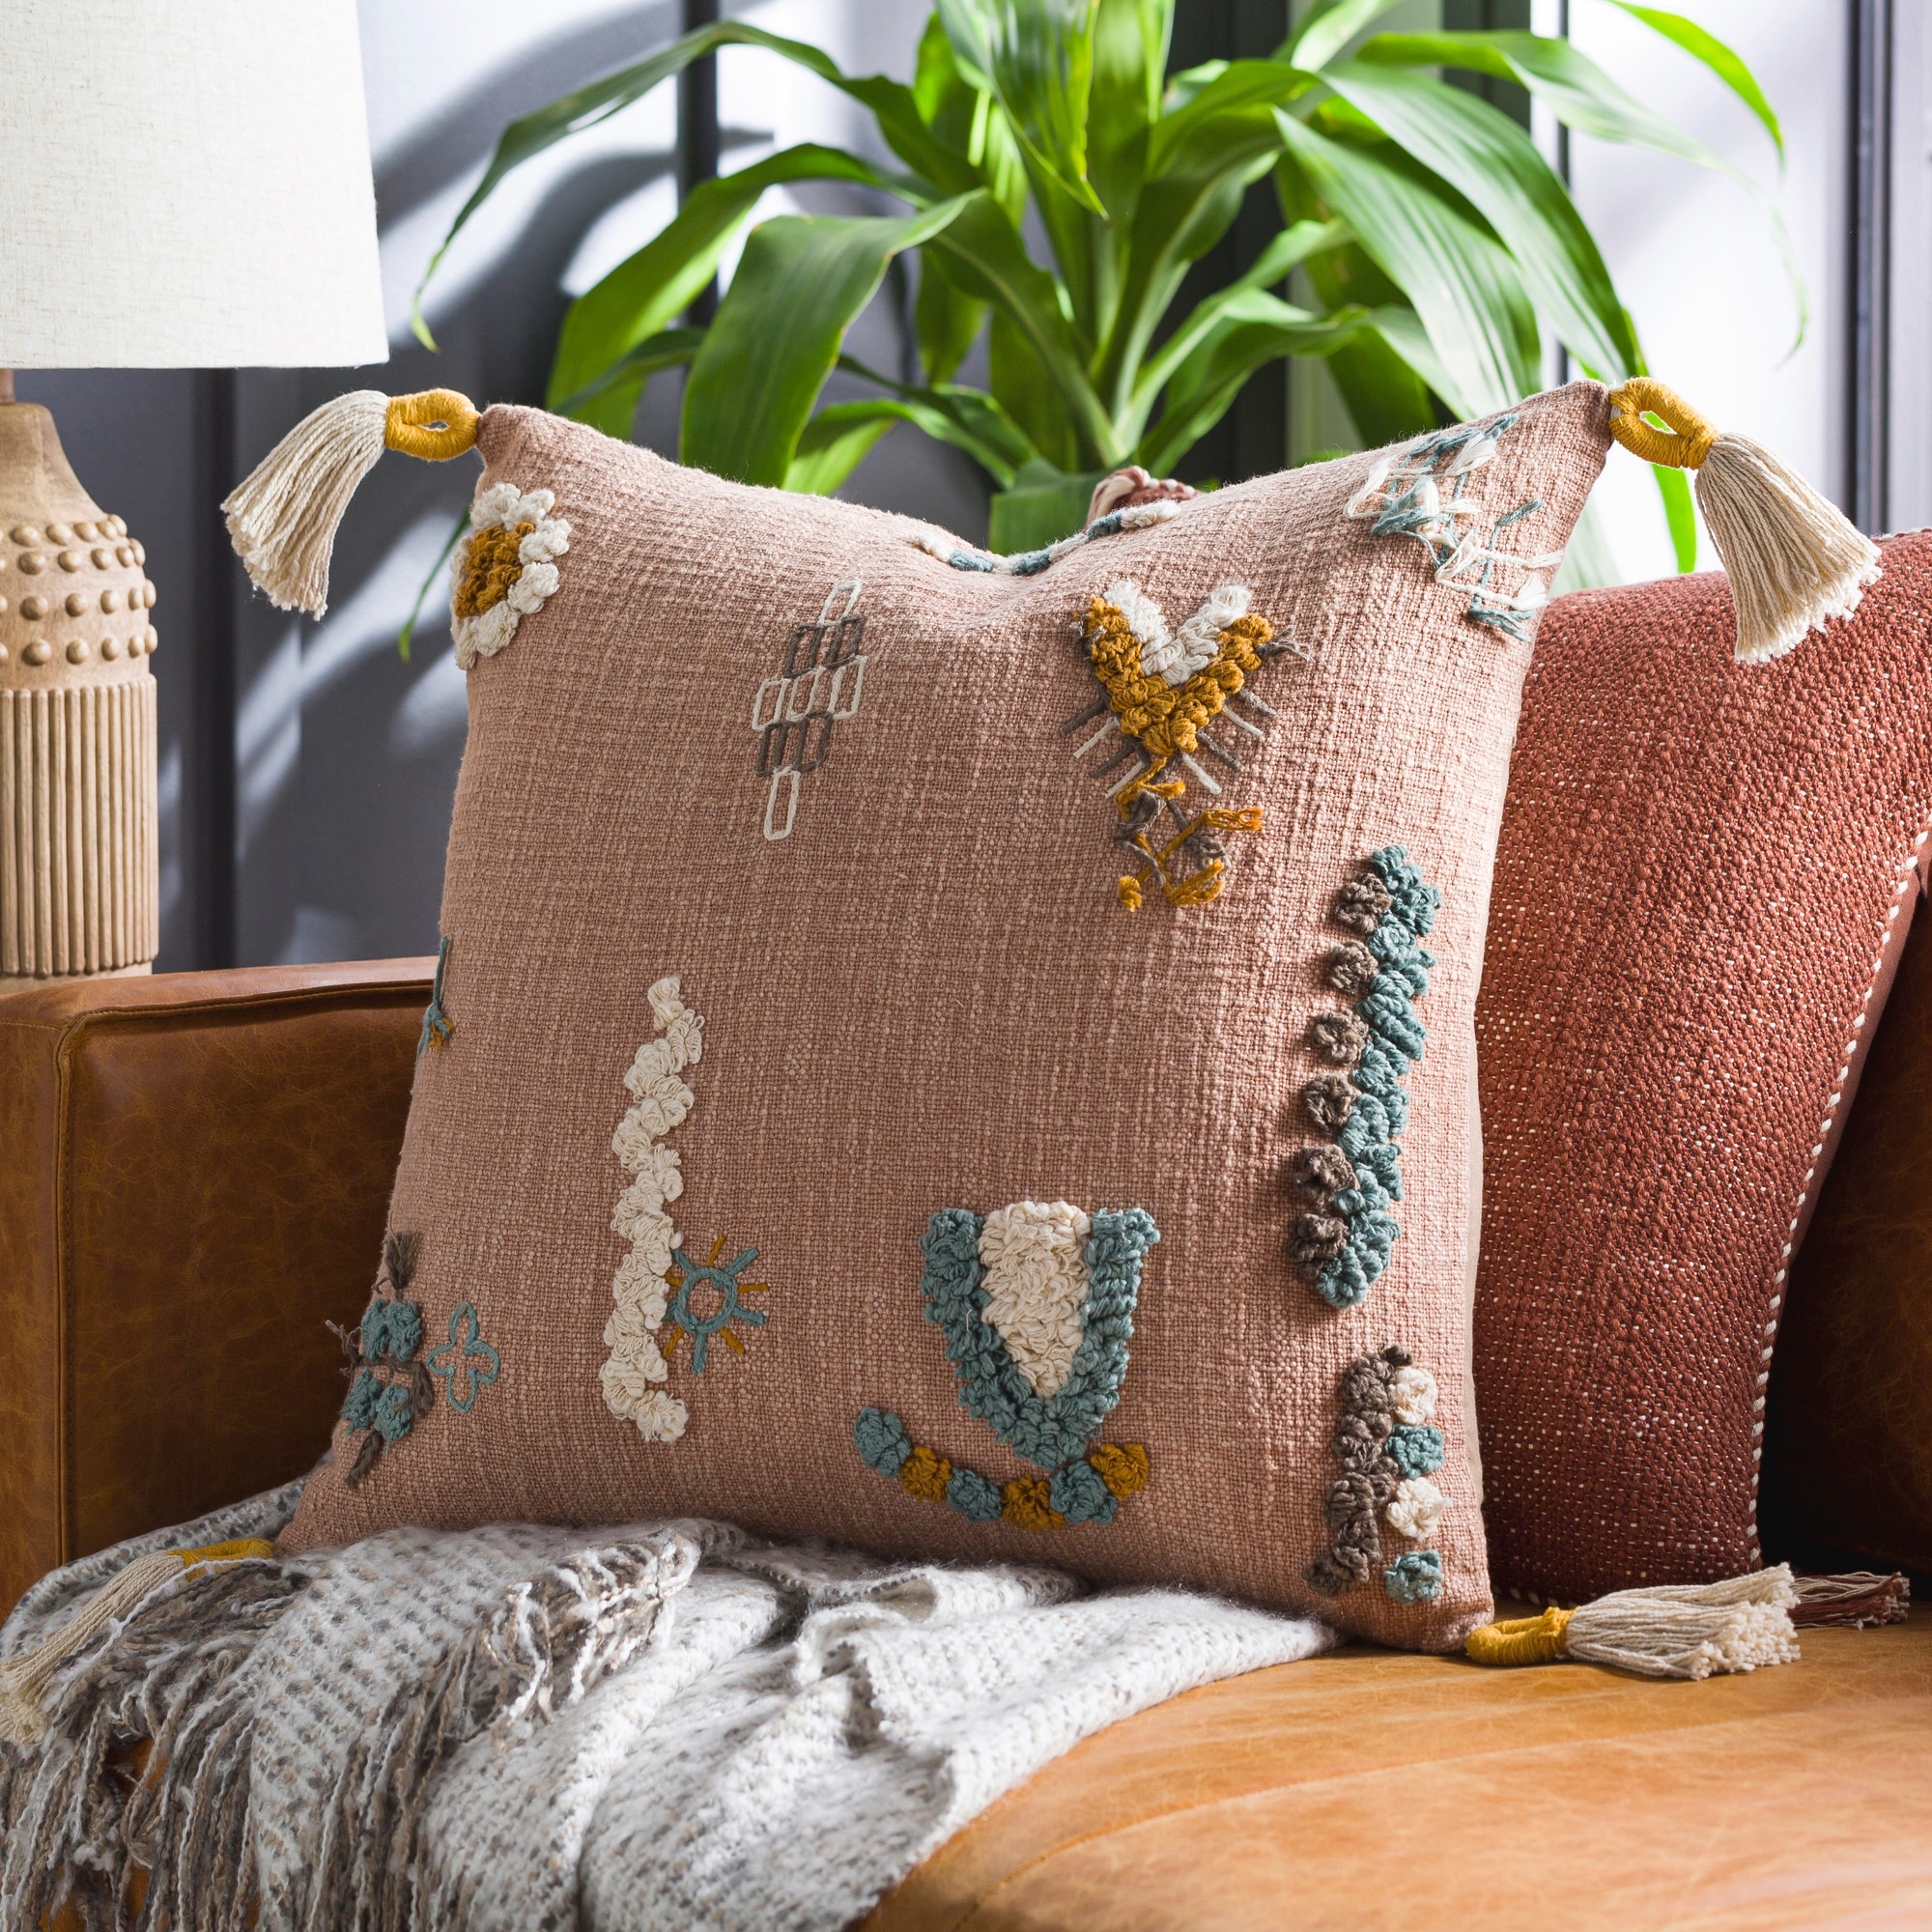 https://ak1.ostkcdn.com/images/products/is/images/direct/c959765f3f140e9e1e4523619f380205292c3271/Jeevan-Pastel-Embroidery-Textured-Throw-Pillow.jpg